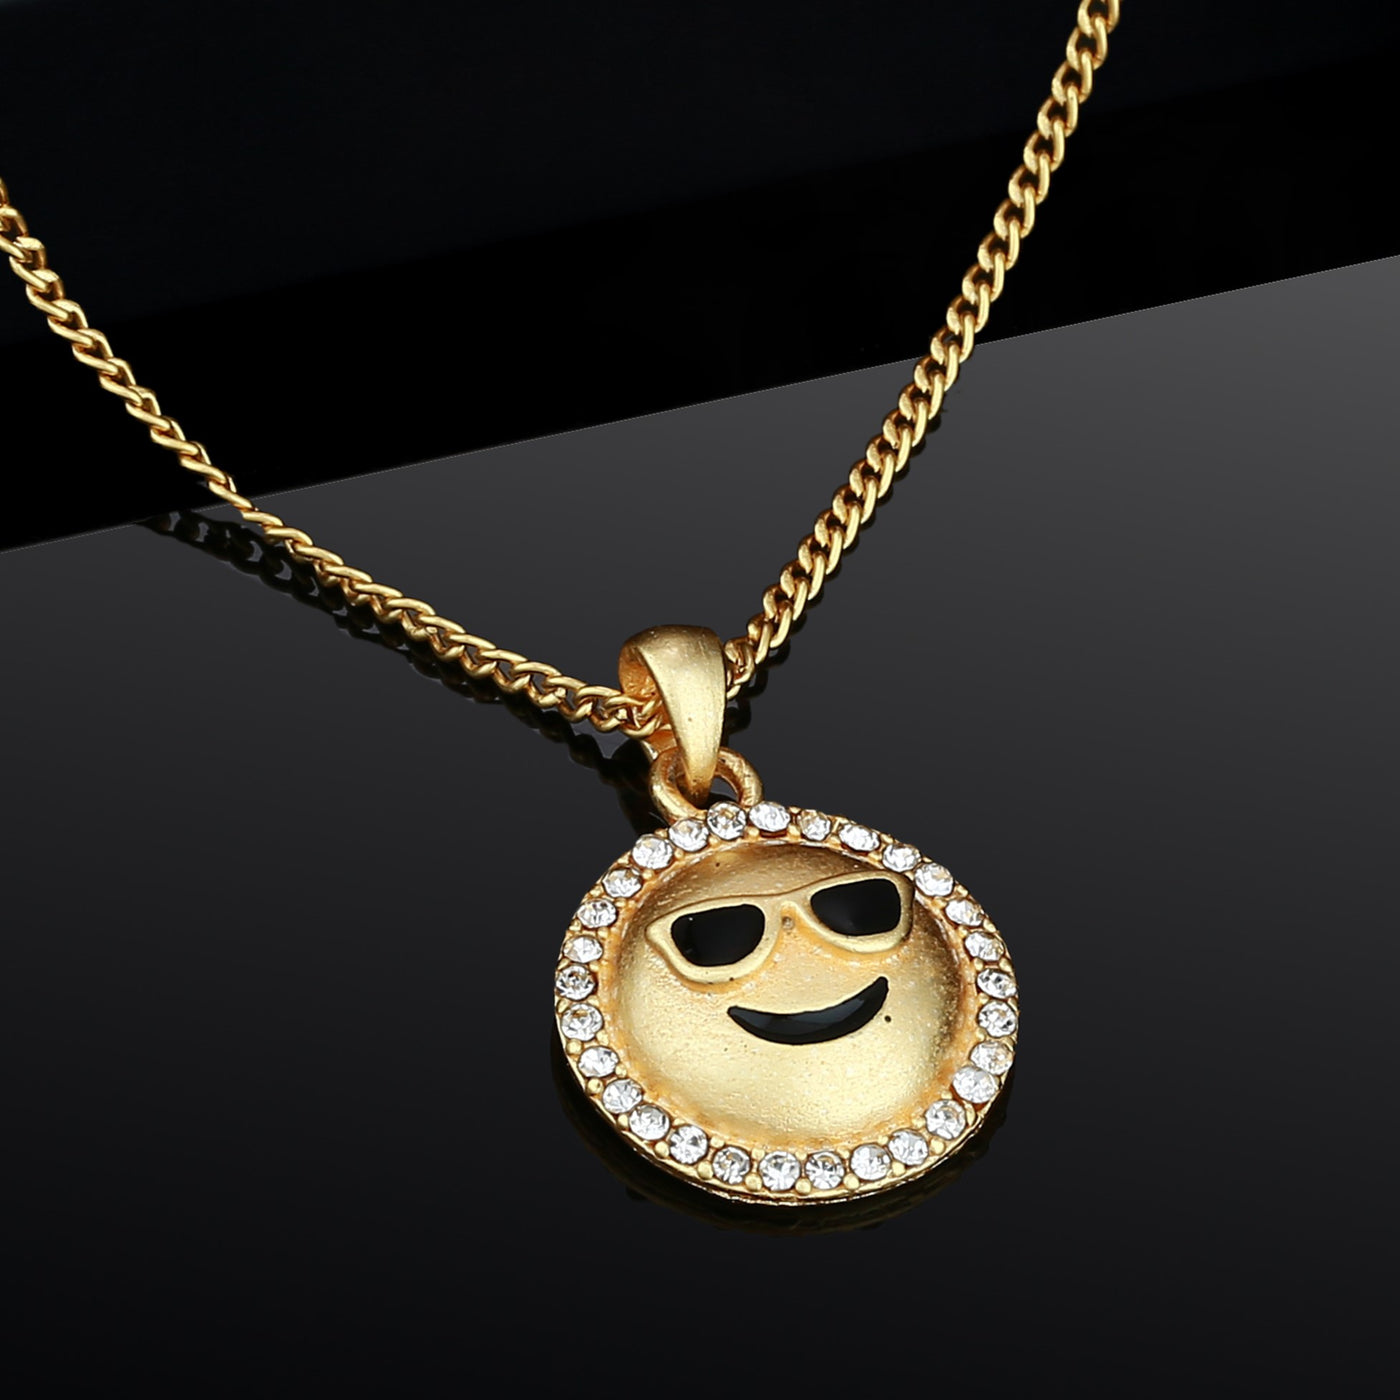 Estele - Gold Plated Cool Smiley Face Emoji Pendant with Austrian Crystals for Women / Girls